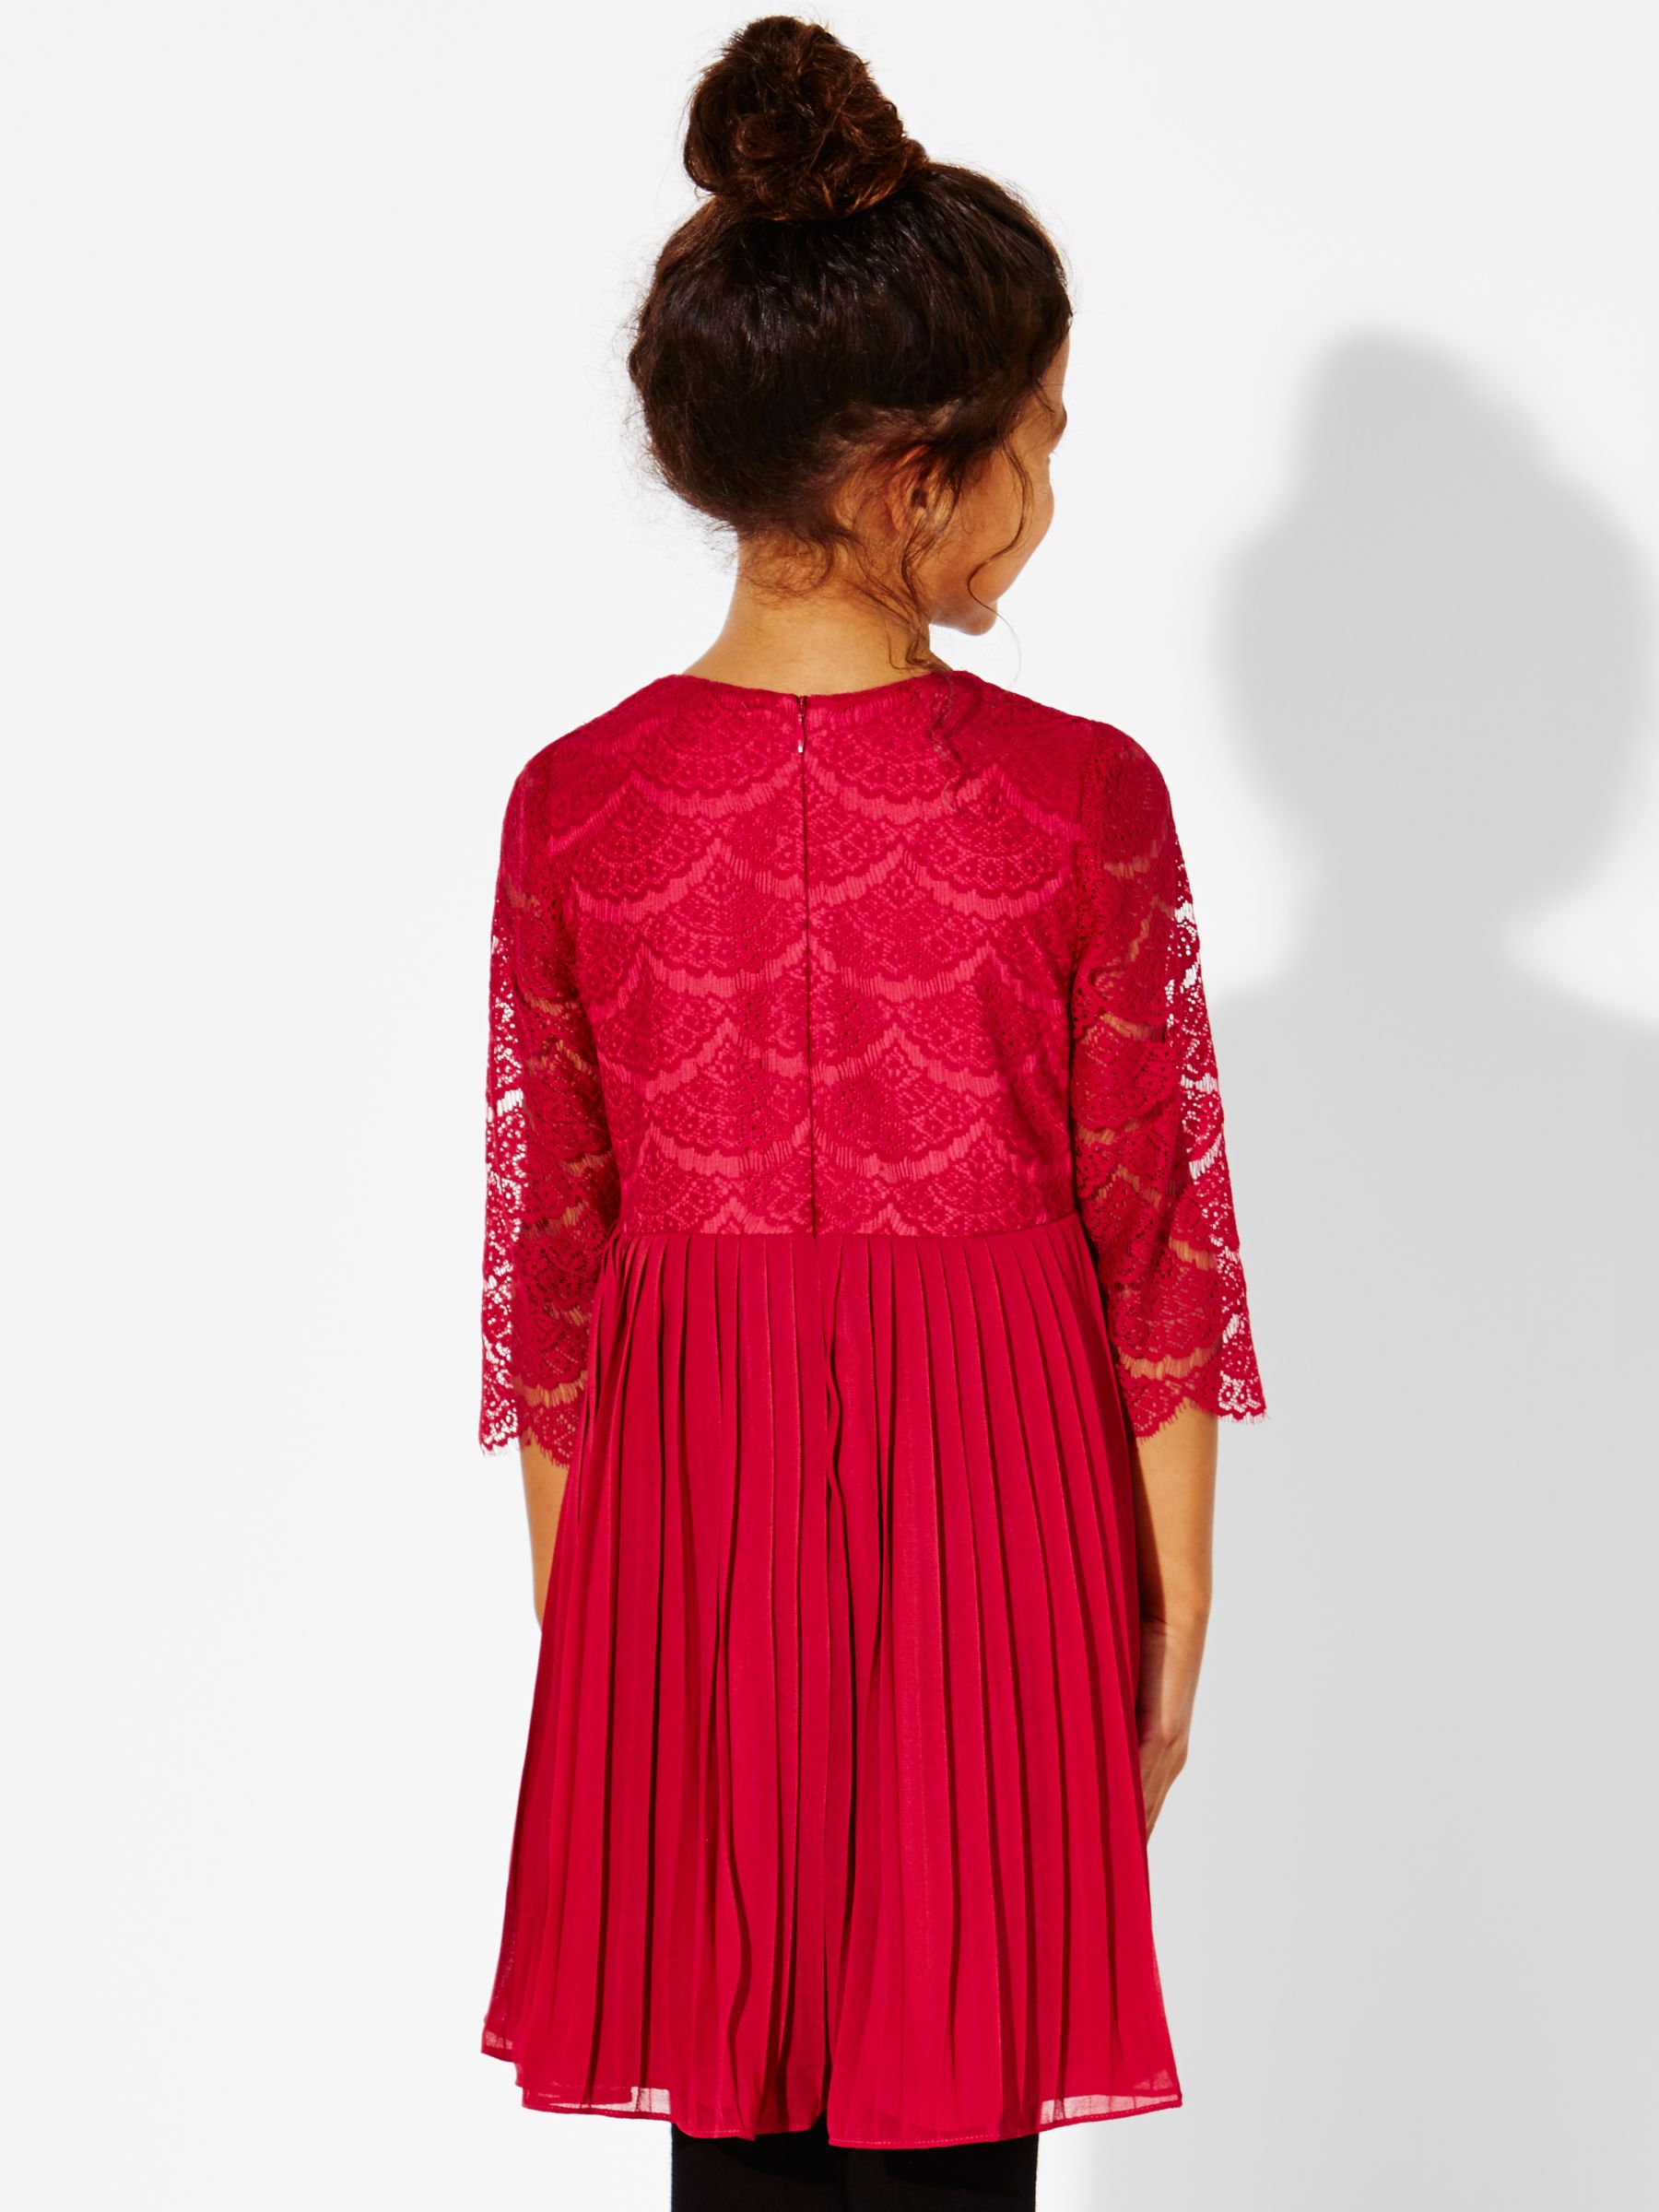 John Lewis Girl Lace Party Dress, Red at John Lewis & Partners